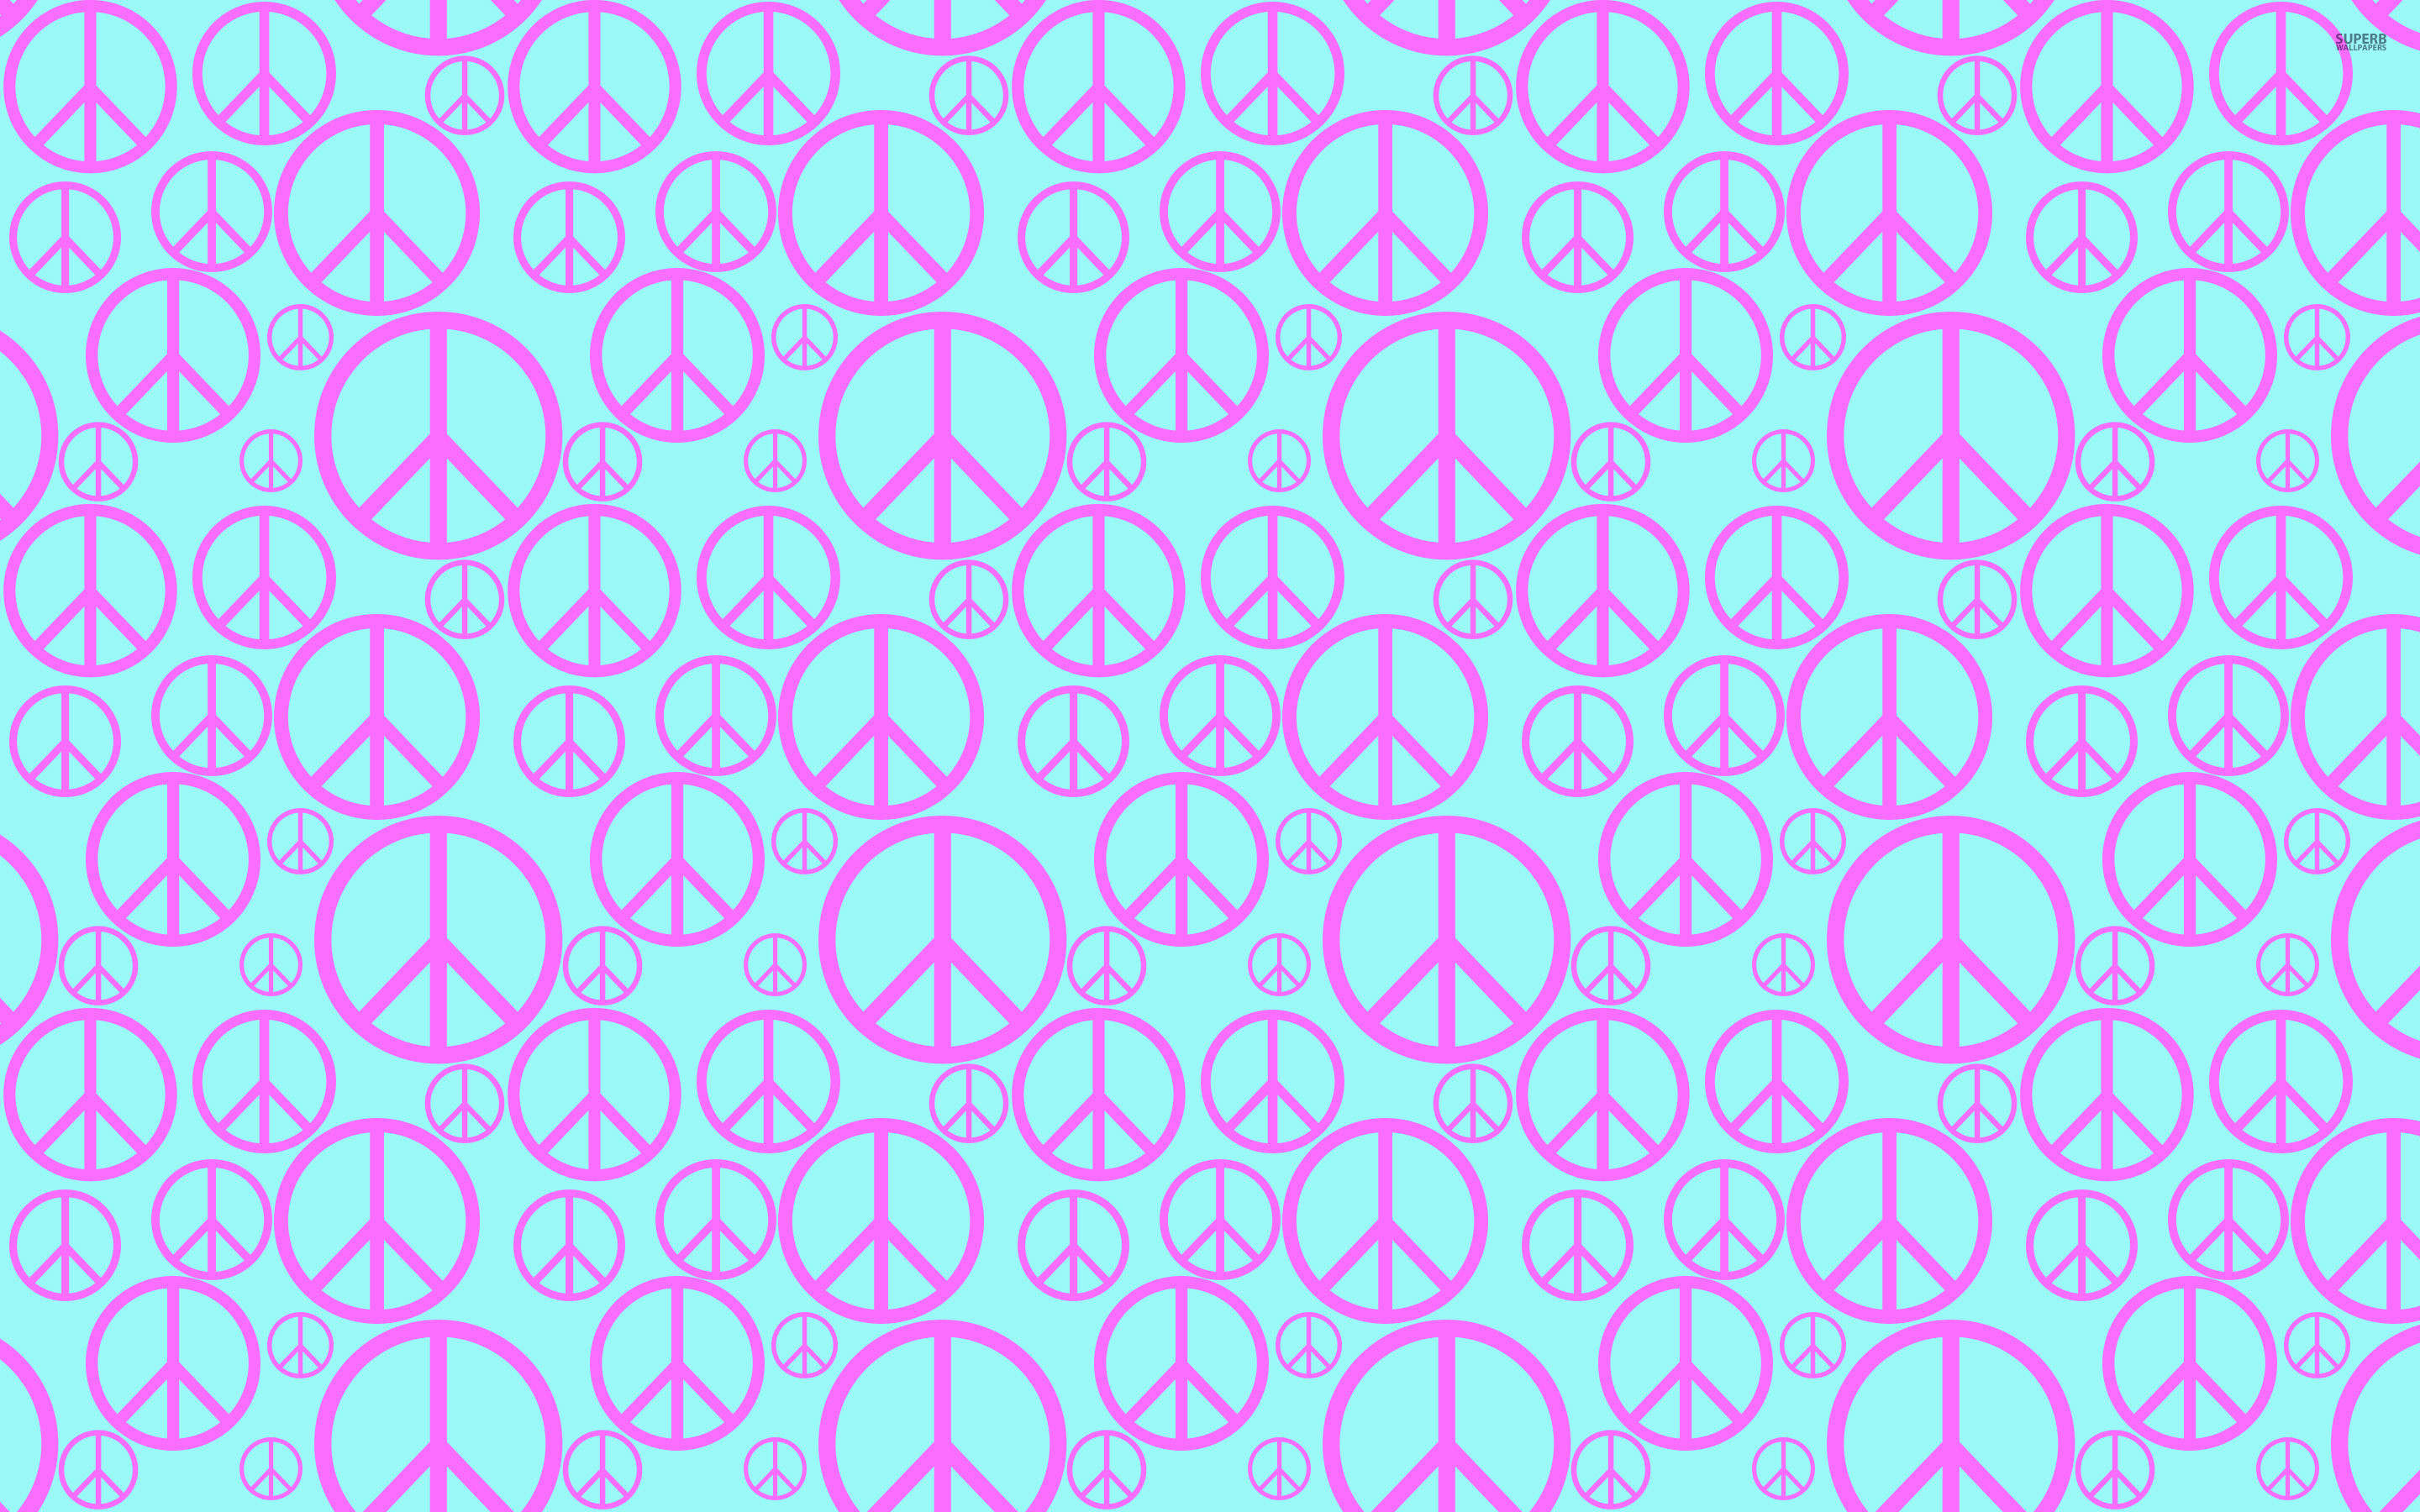 2880x1800 Peace Sign Backgrounds | Peace symbol pattern wallpaper 